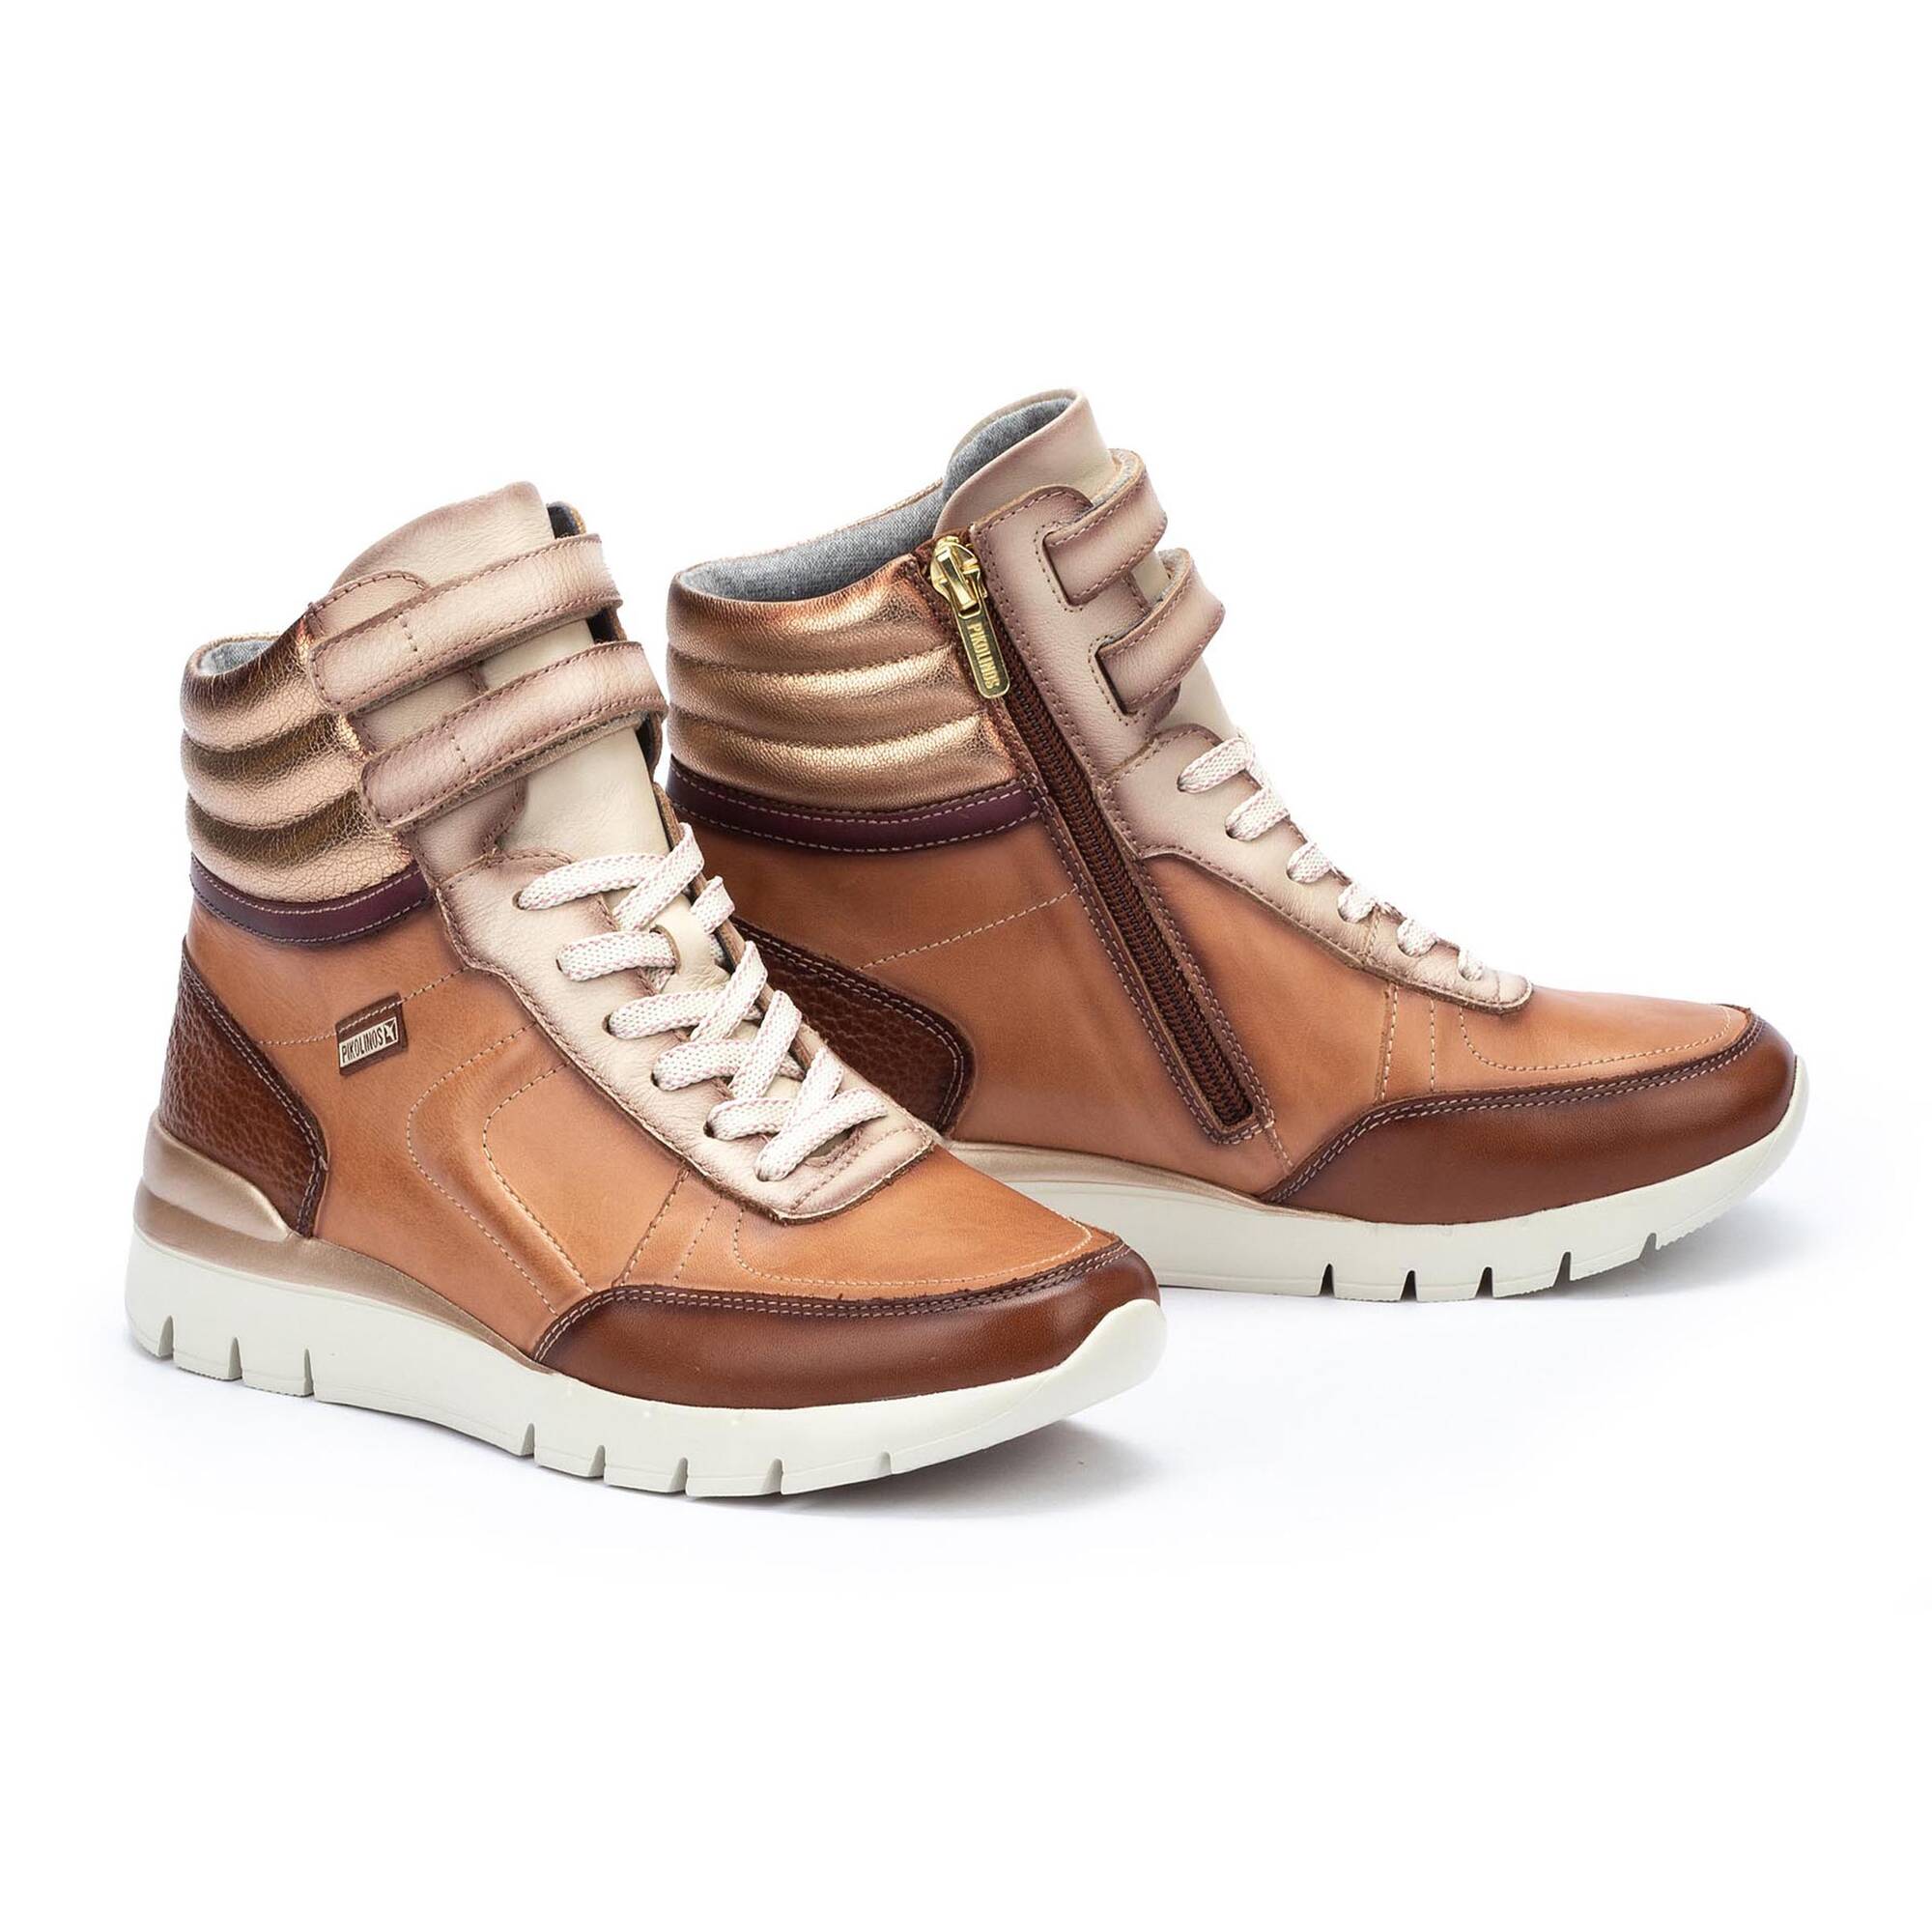 Sneakers | CANTABRIA W4R-8577C1, TERRACOTA, large image number 100 | null